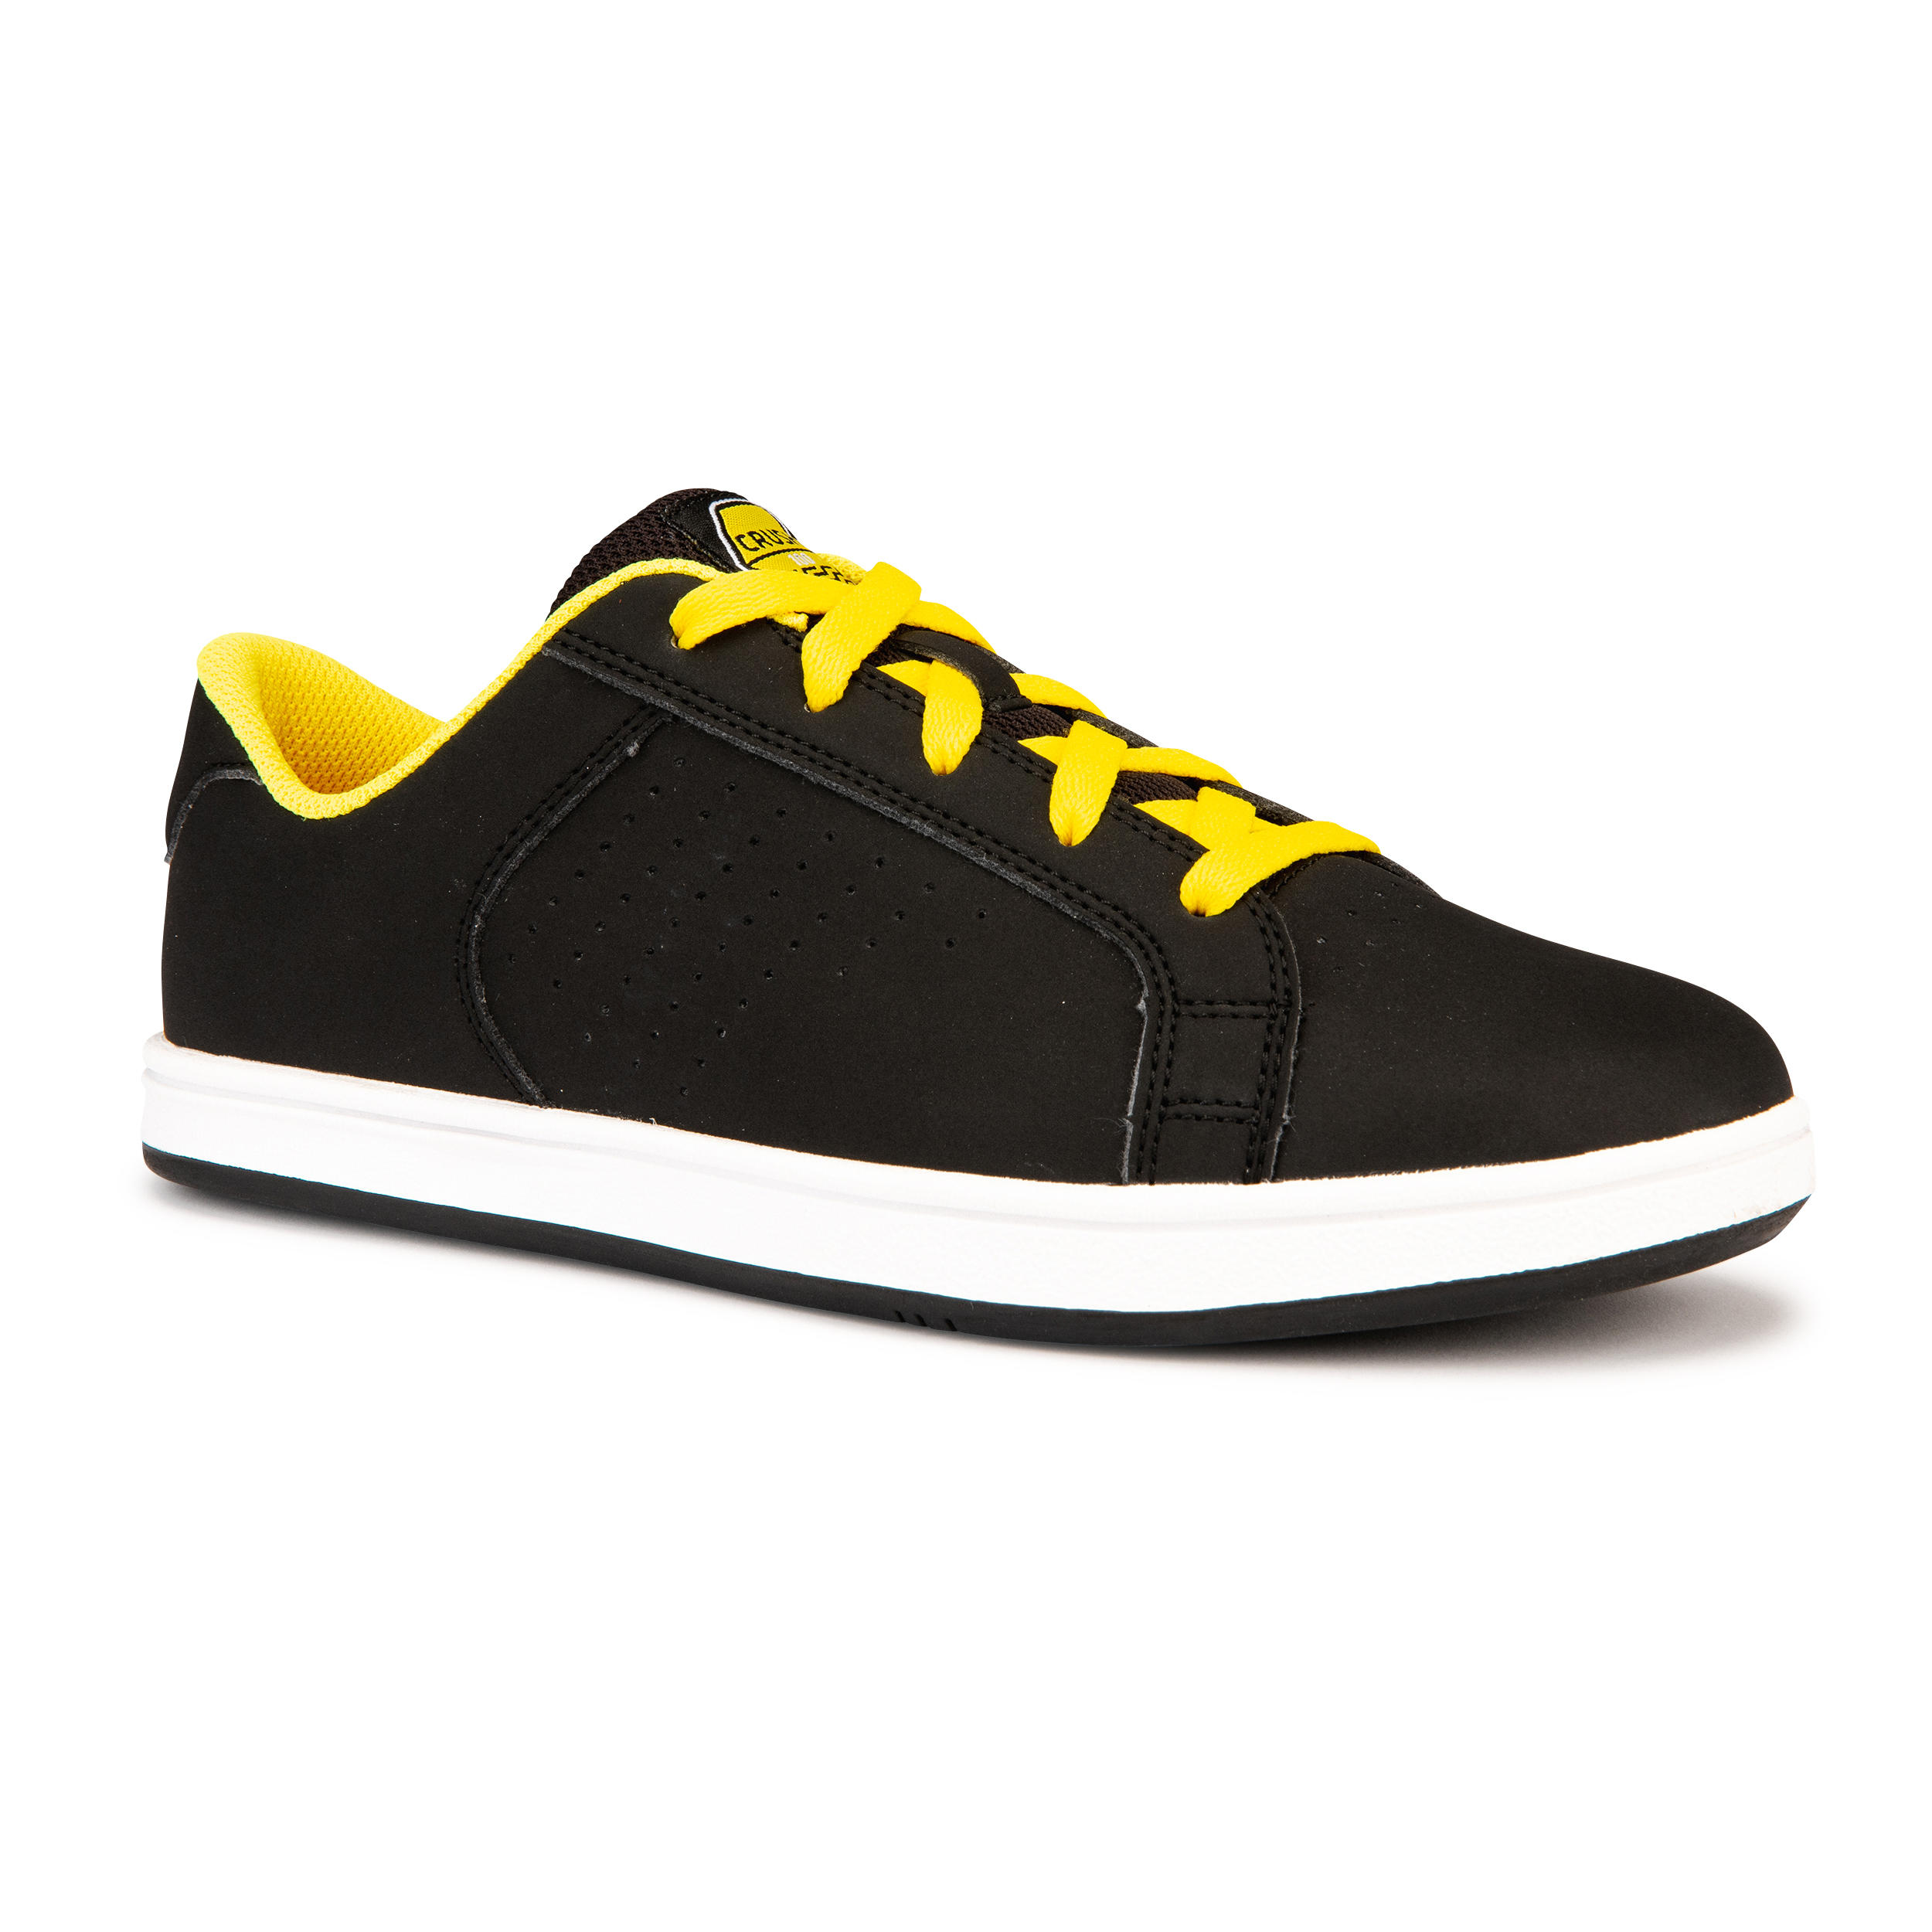 black and yellow skate shoes